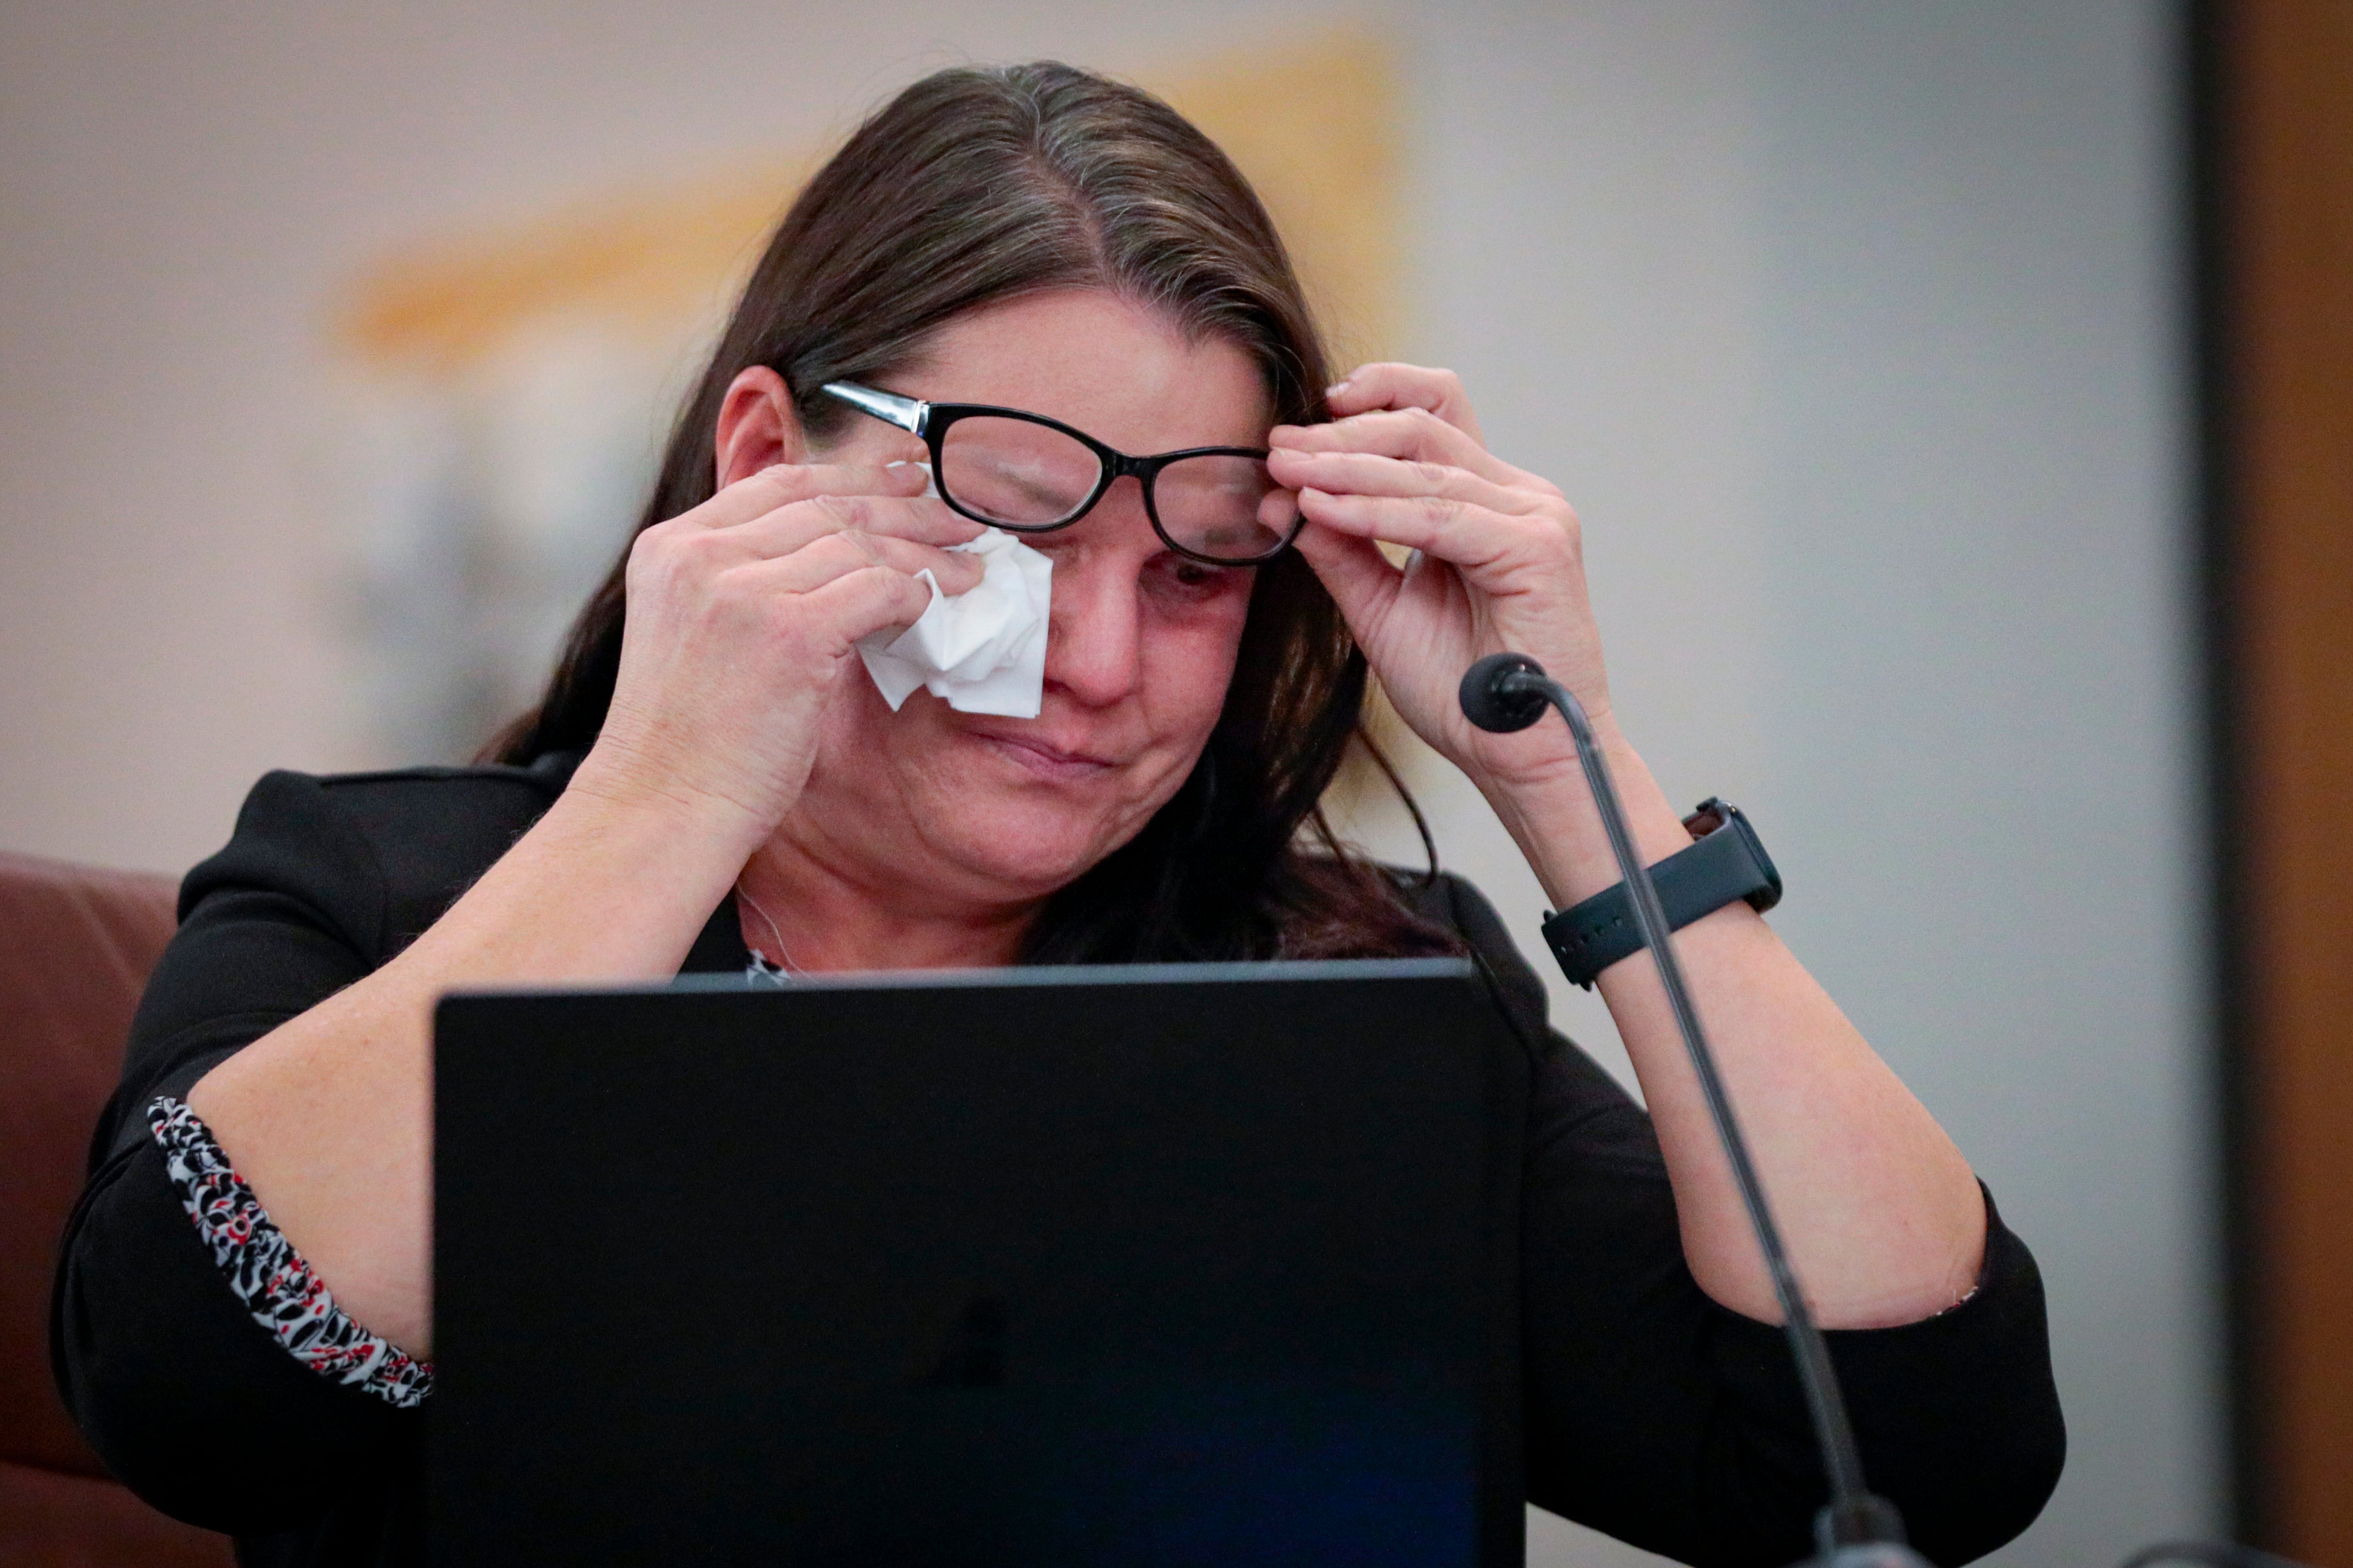 A woman with dark hair lifts her glasses to wipe her eyes with a tissue. There’s a laptop and mic in front of her.